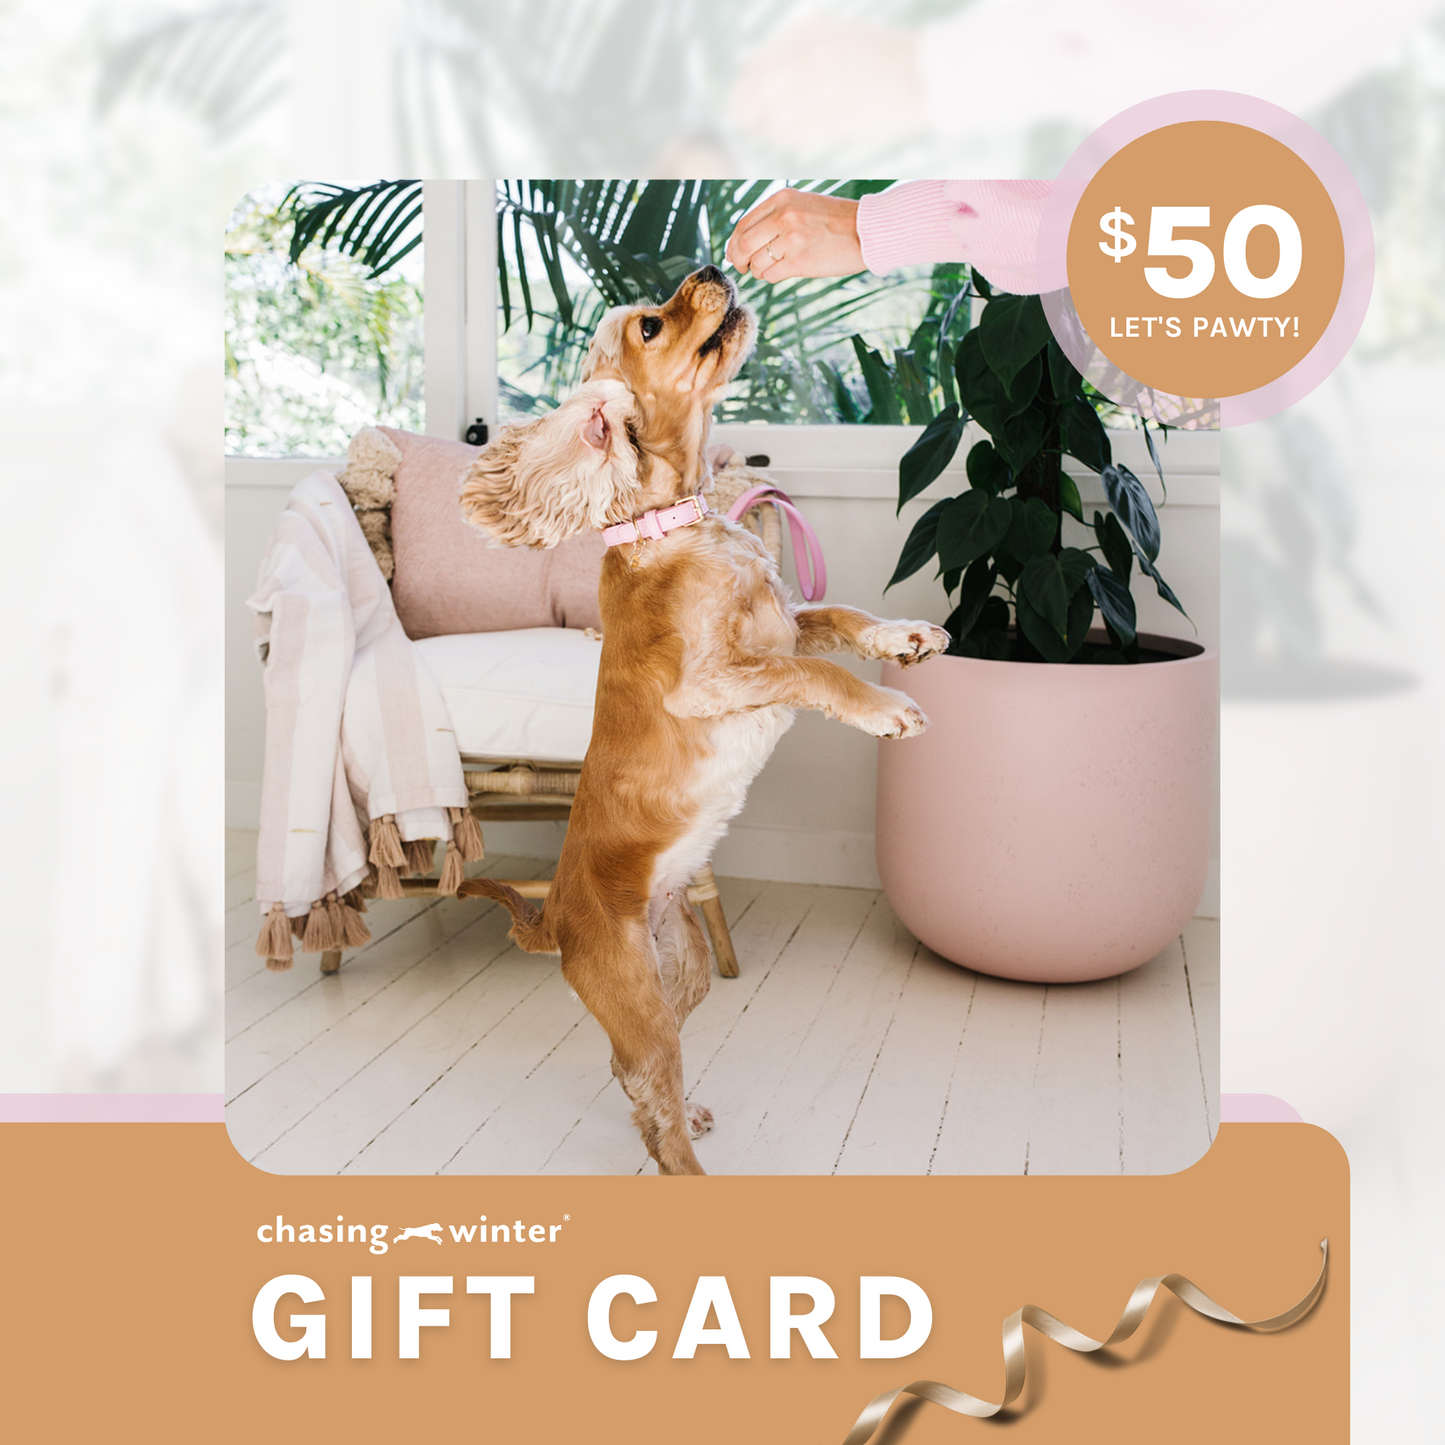 Chasing Winter Gift Card $50